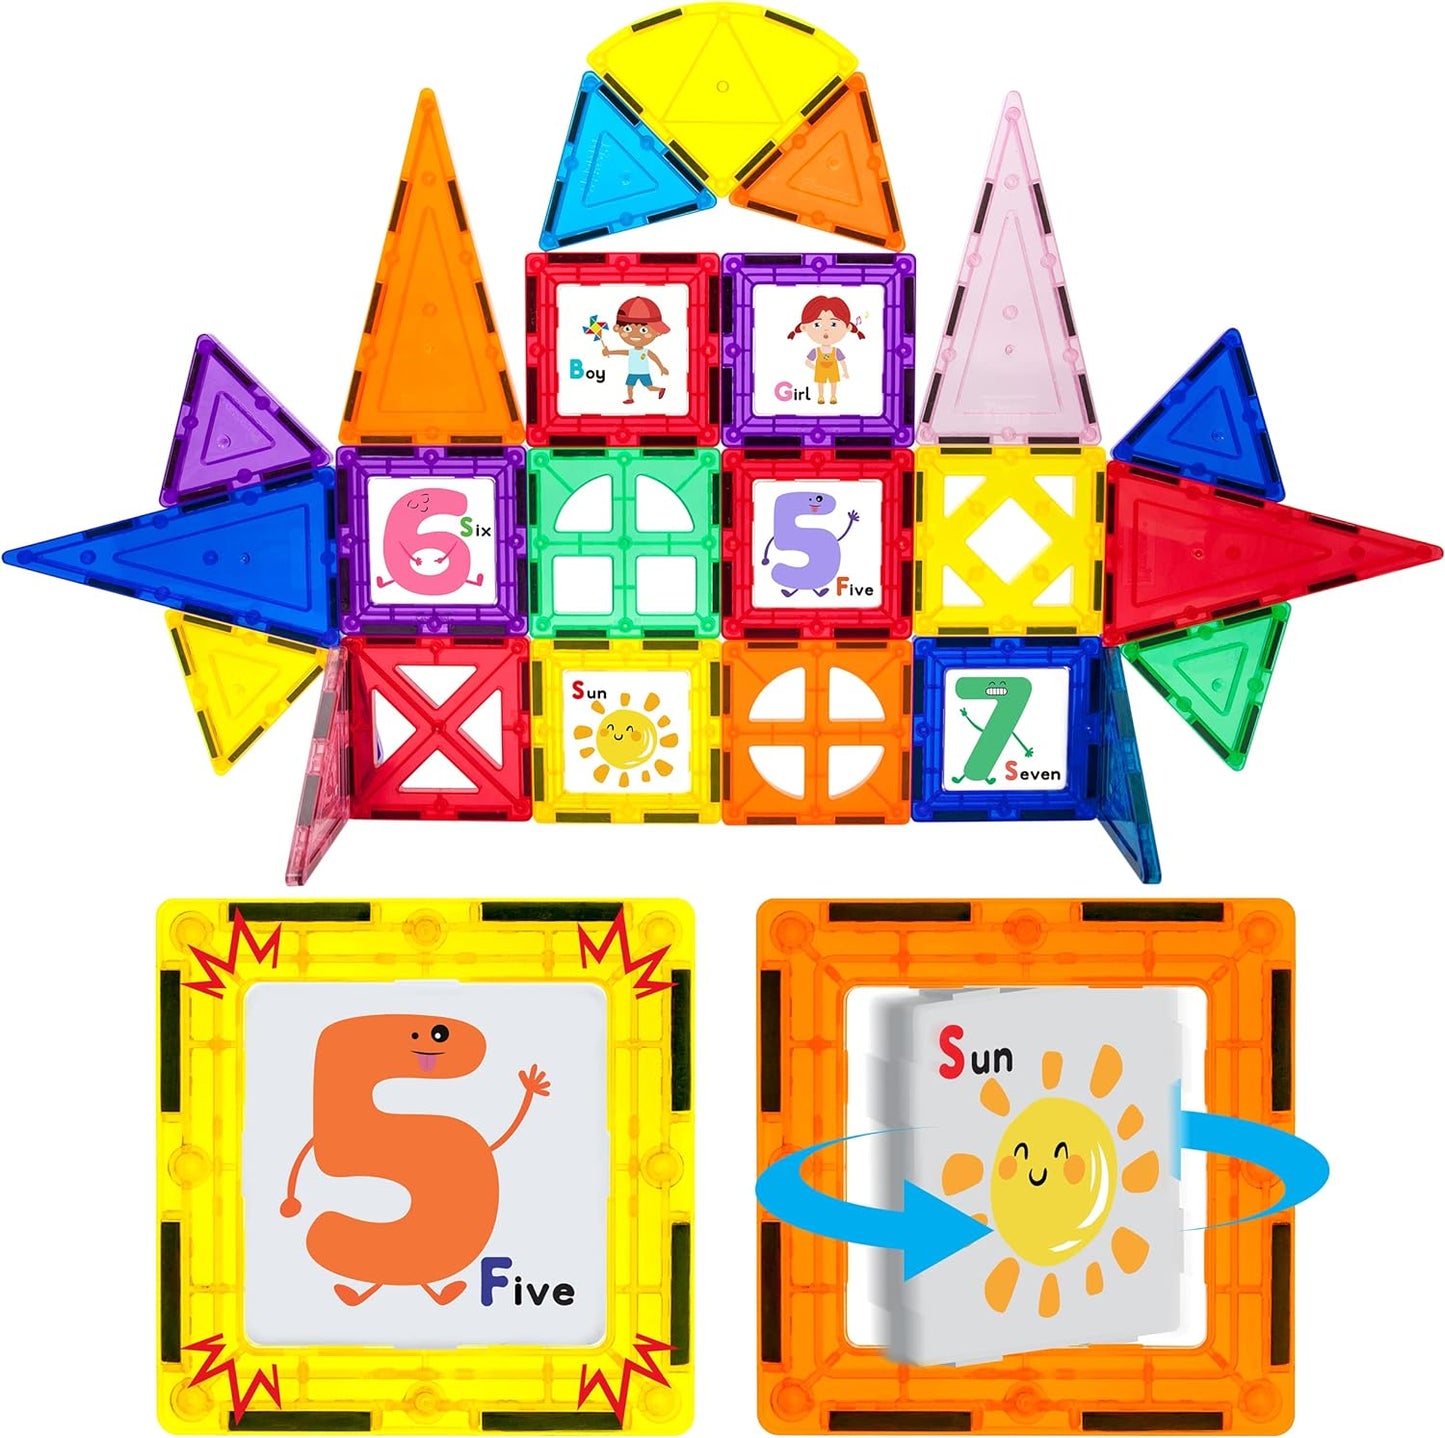 PicassoTiles 42 Piece Set Including 10 Click-In Educational Tiles